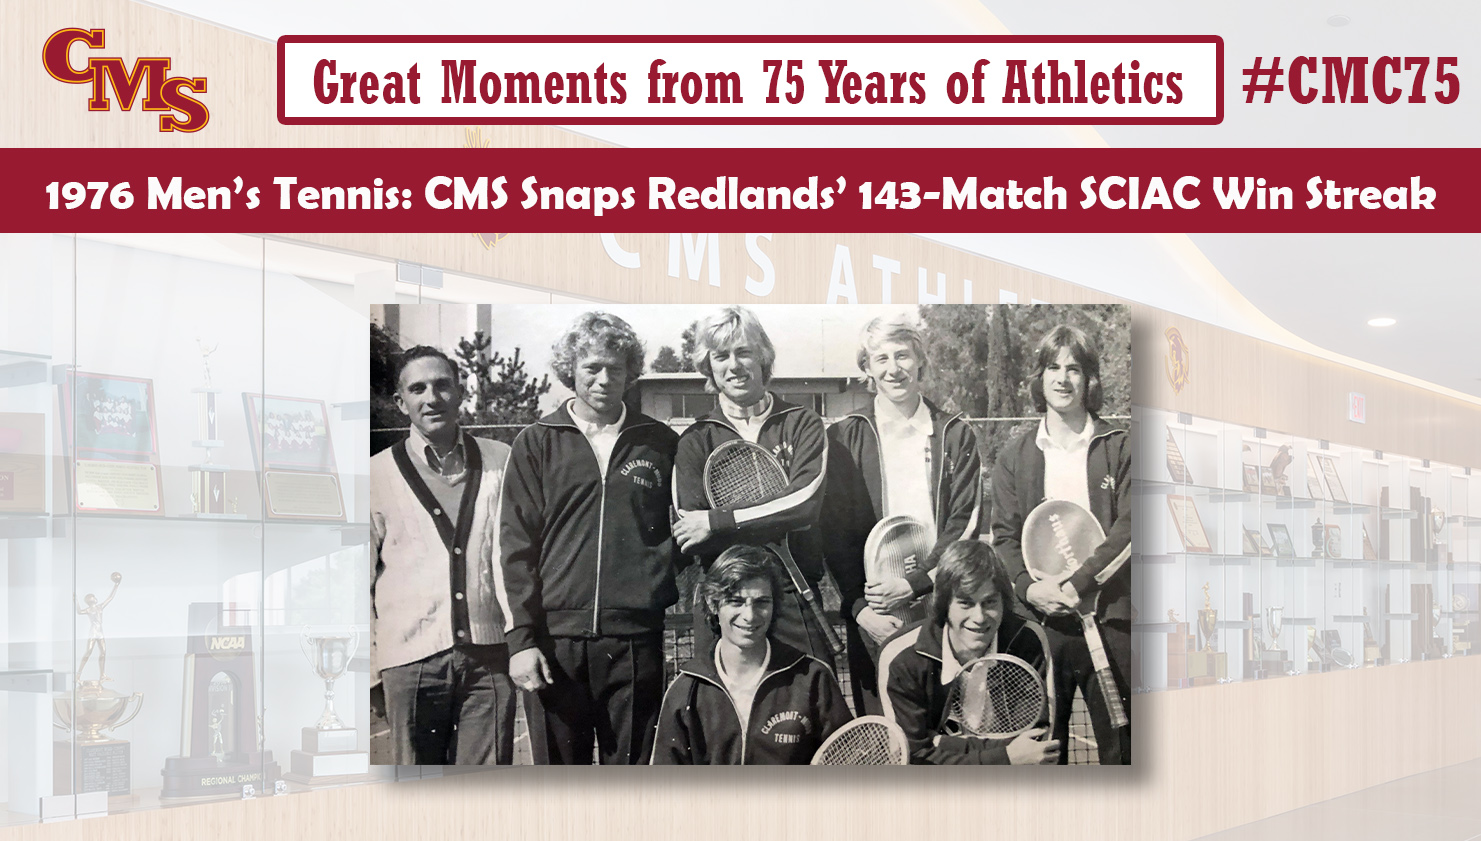 The 1976 men's tennis team. Words over the photo read: Great Moments from 75 Years of Athletics, 1976 Men's Tennis: CMS Snaps Redlands' 143-Match SCIAC Win Streak